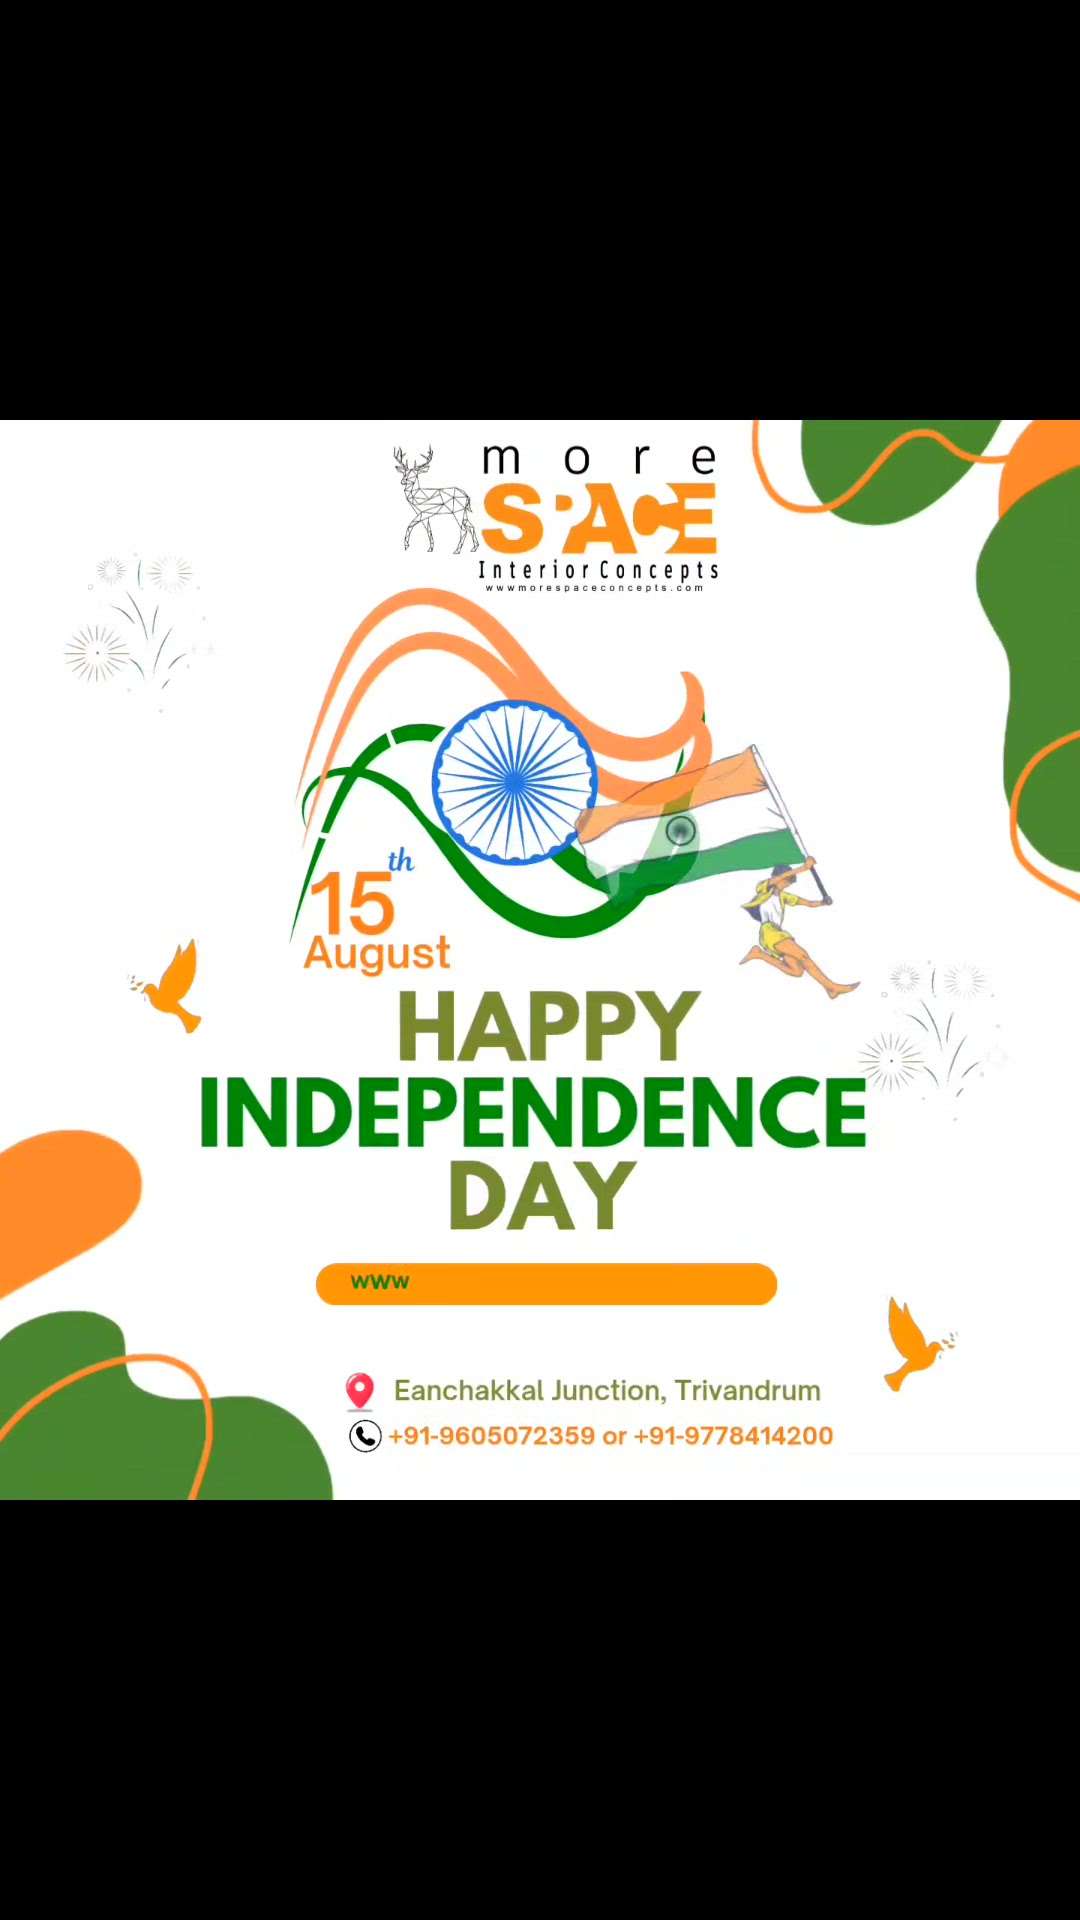 🇮🇳Happy Independence Day To All 🇮🇳
Proud To Be An INDIAN 🤩
🇮🇳♥️
#independenceday #loveindia #InteriorDesigner #morespaceinteriorconcepts